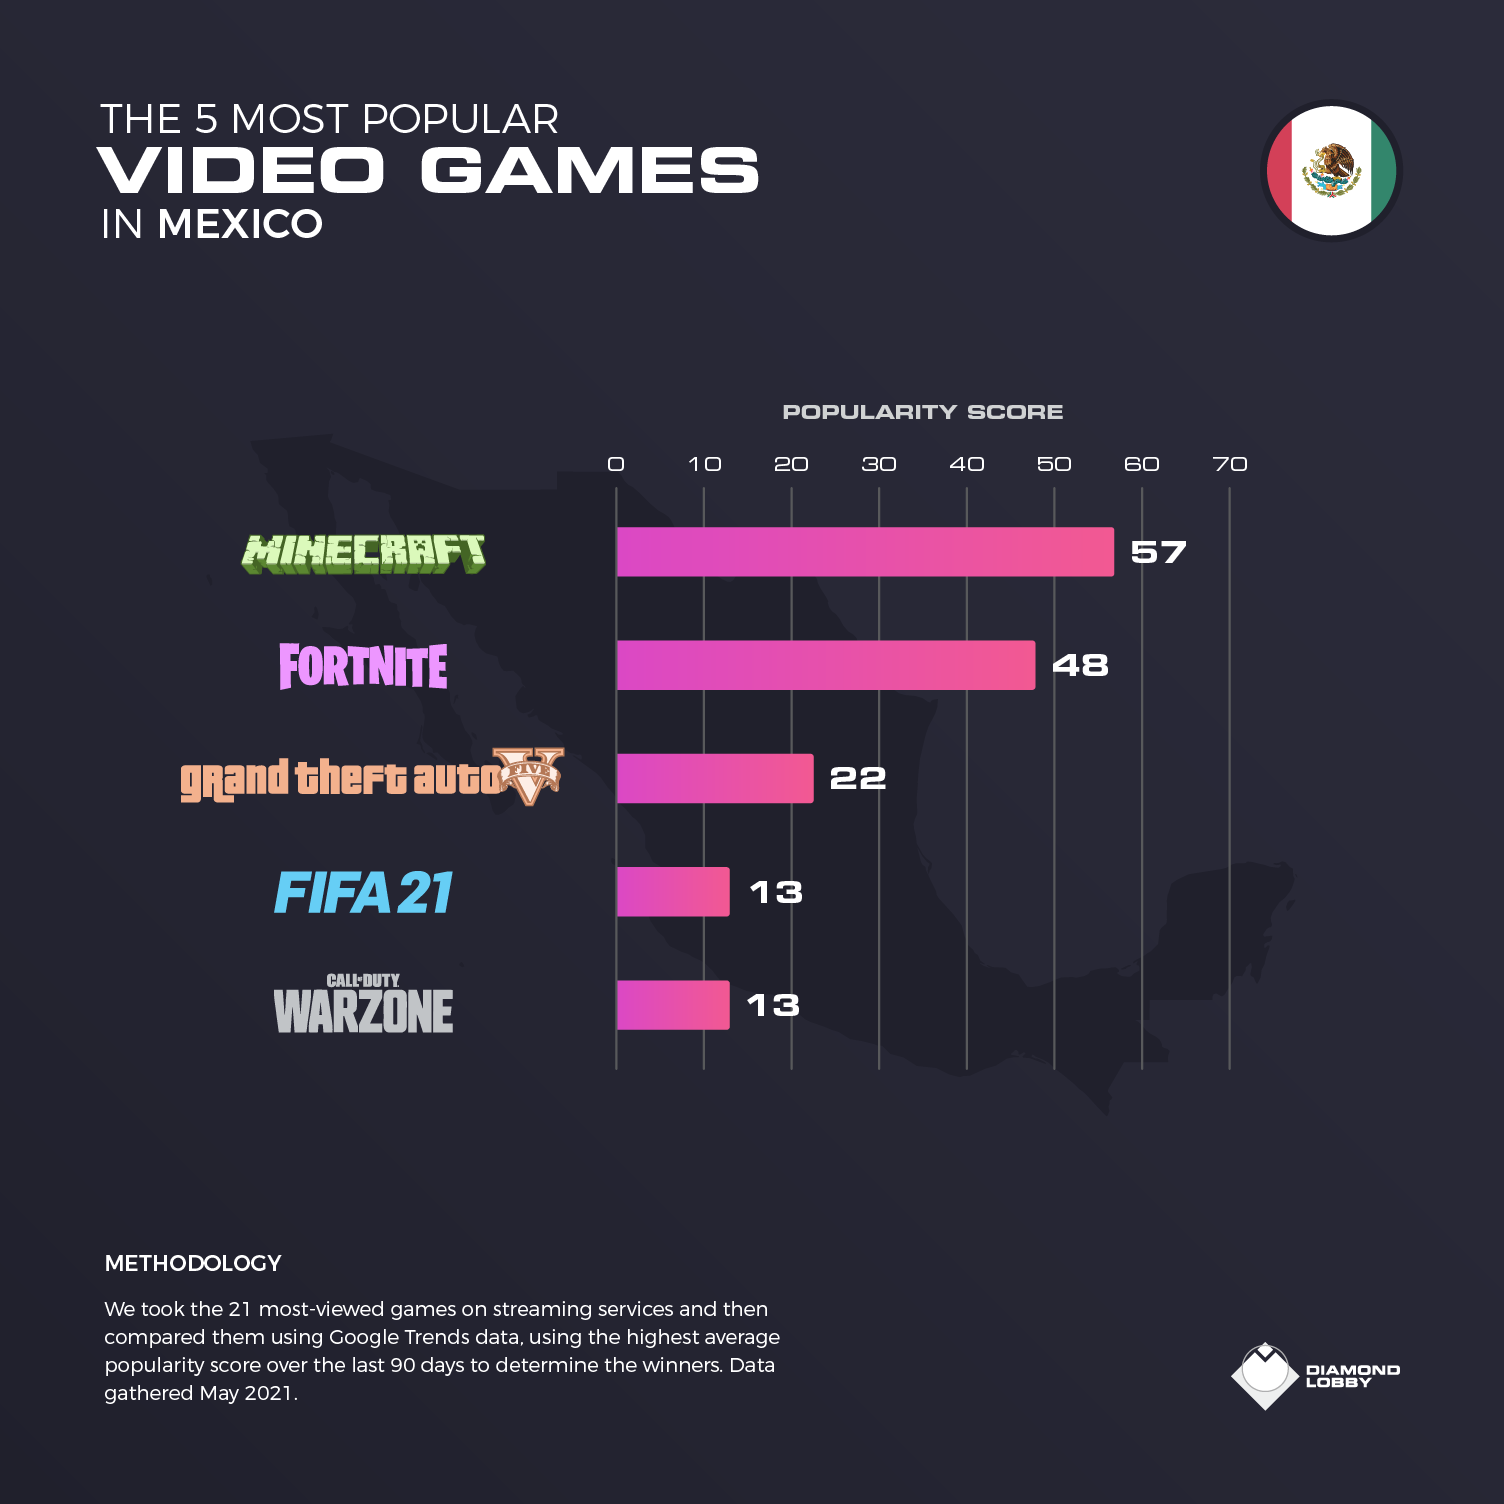 The top 5 video games in Mexico